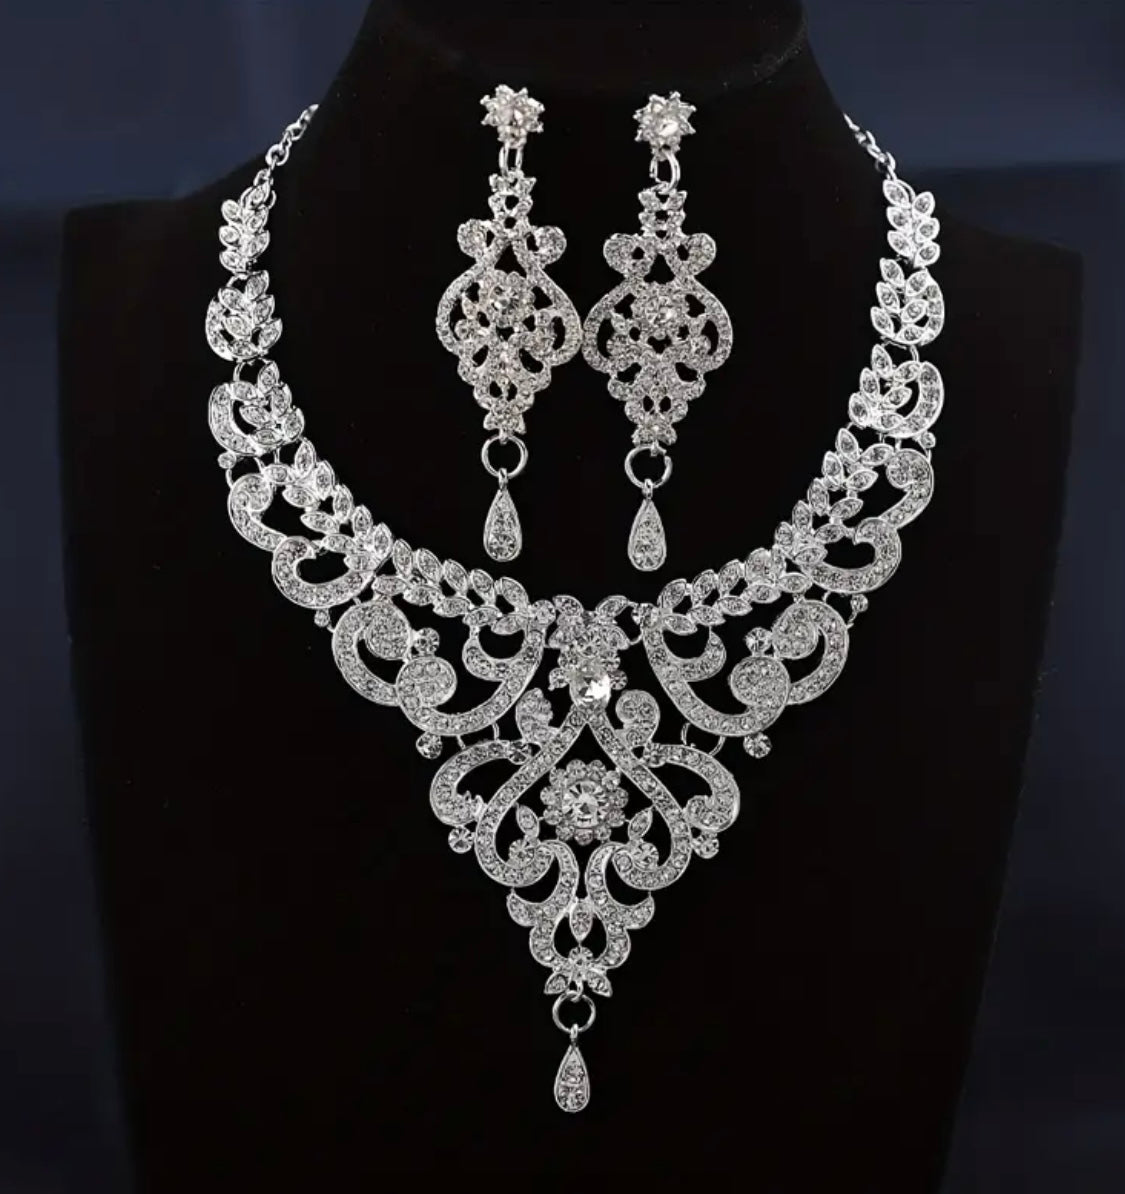 Out standing full rhinestone chandelier style jewelry set.